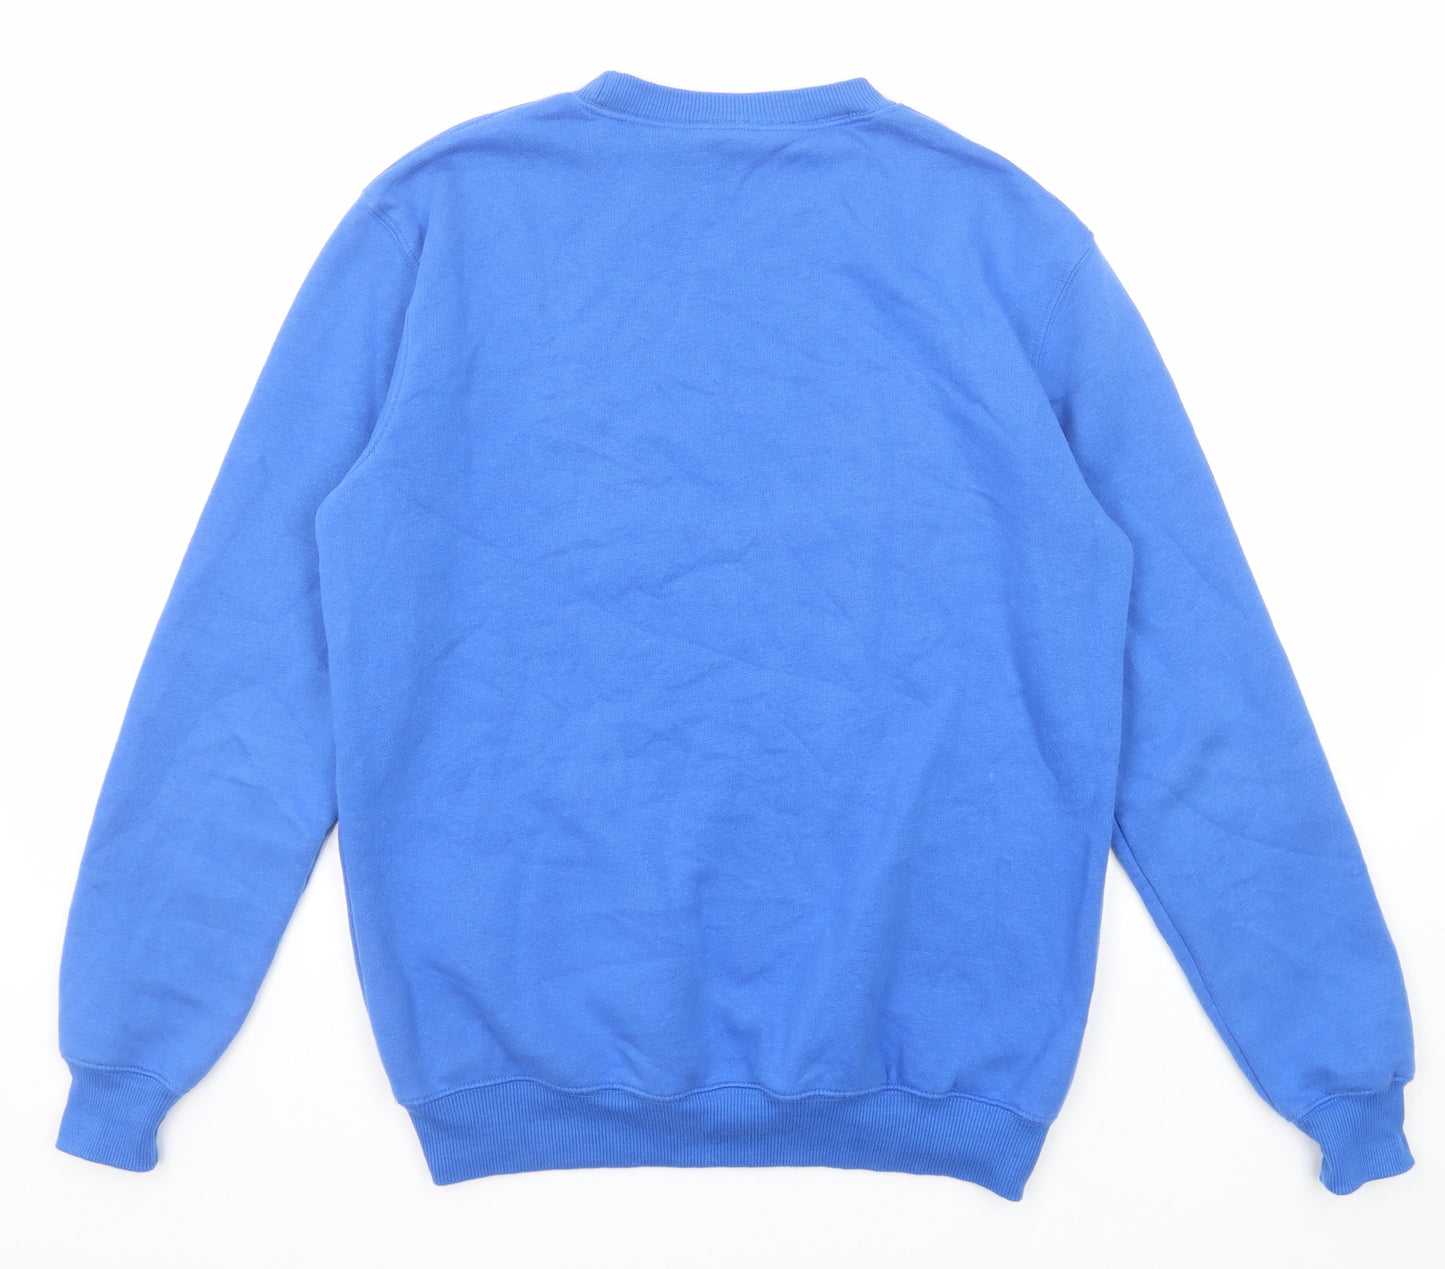 Cotton Traders Mens Blue Cotton Pullover Sweatshirt Size S